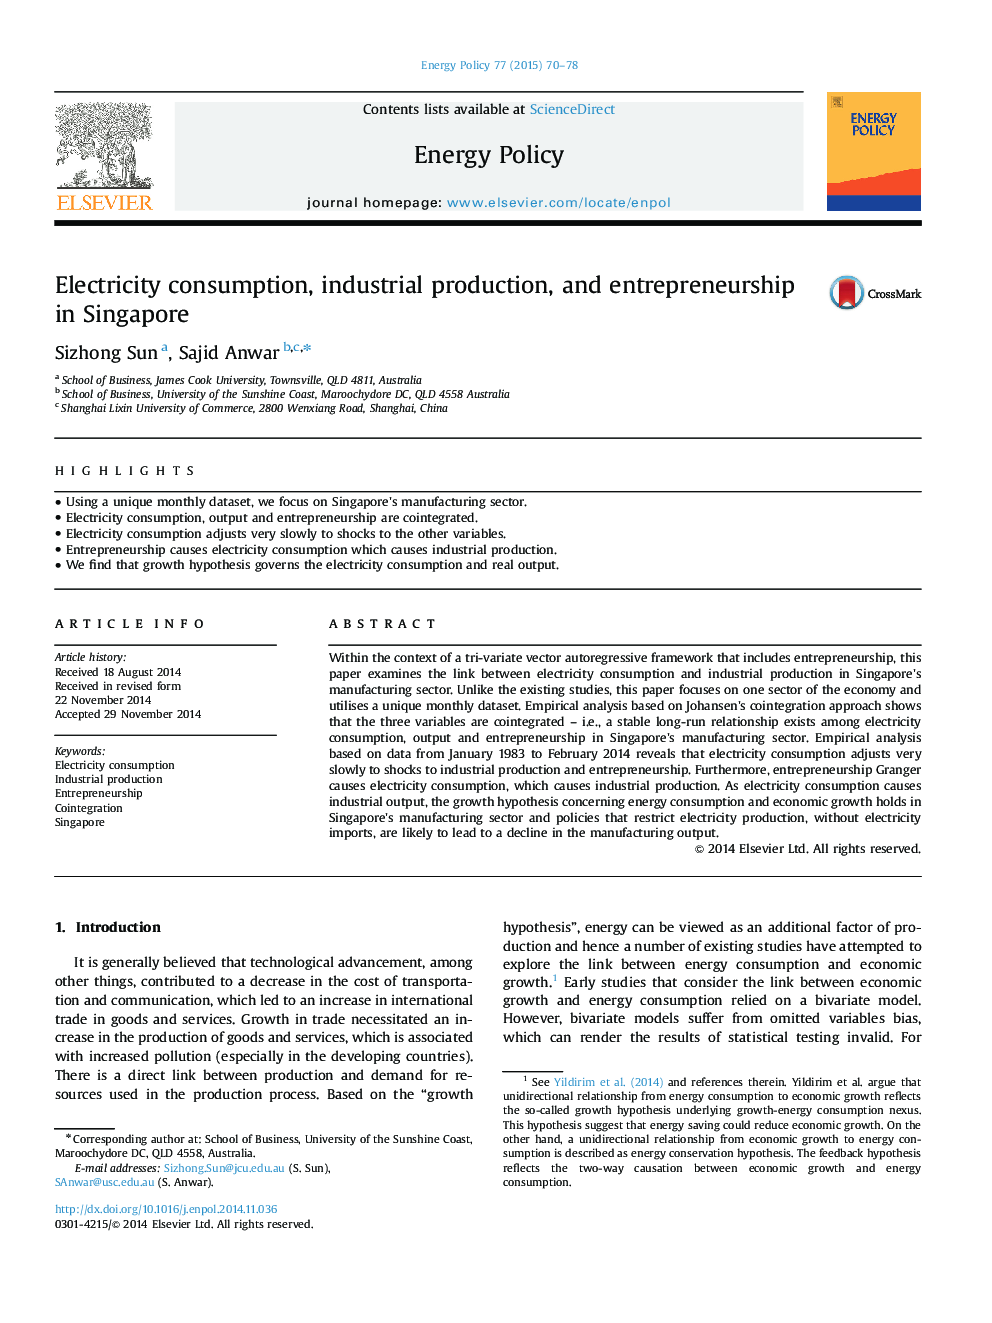 Electricity consumption, industrial production, and entrepreneurship in Singapore